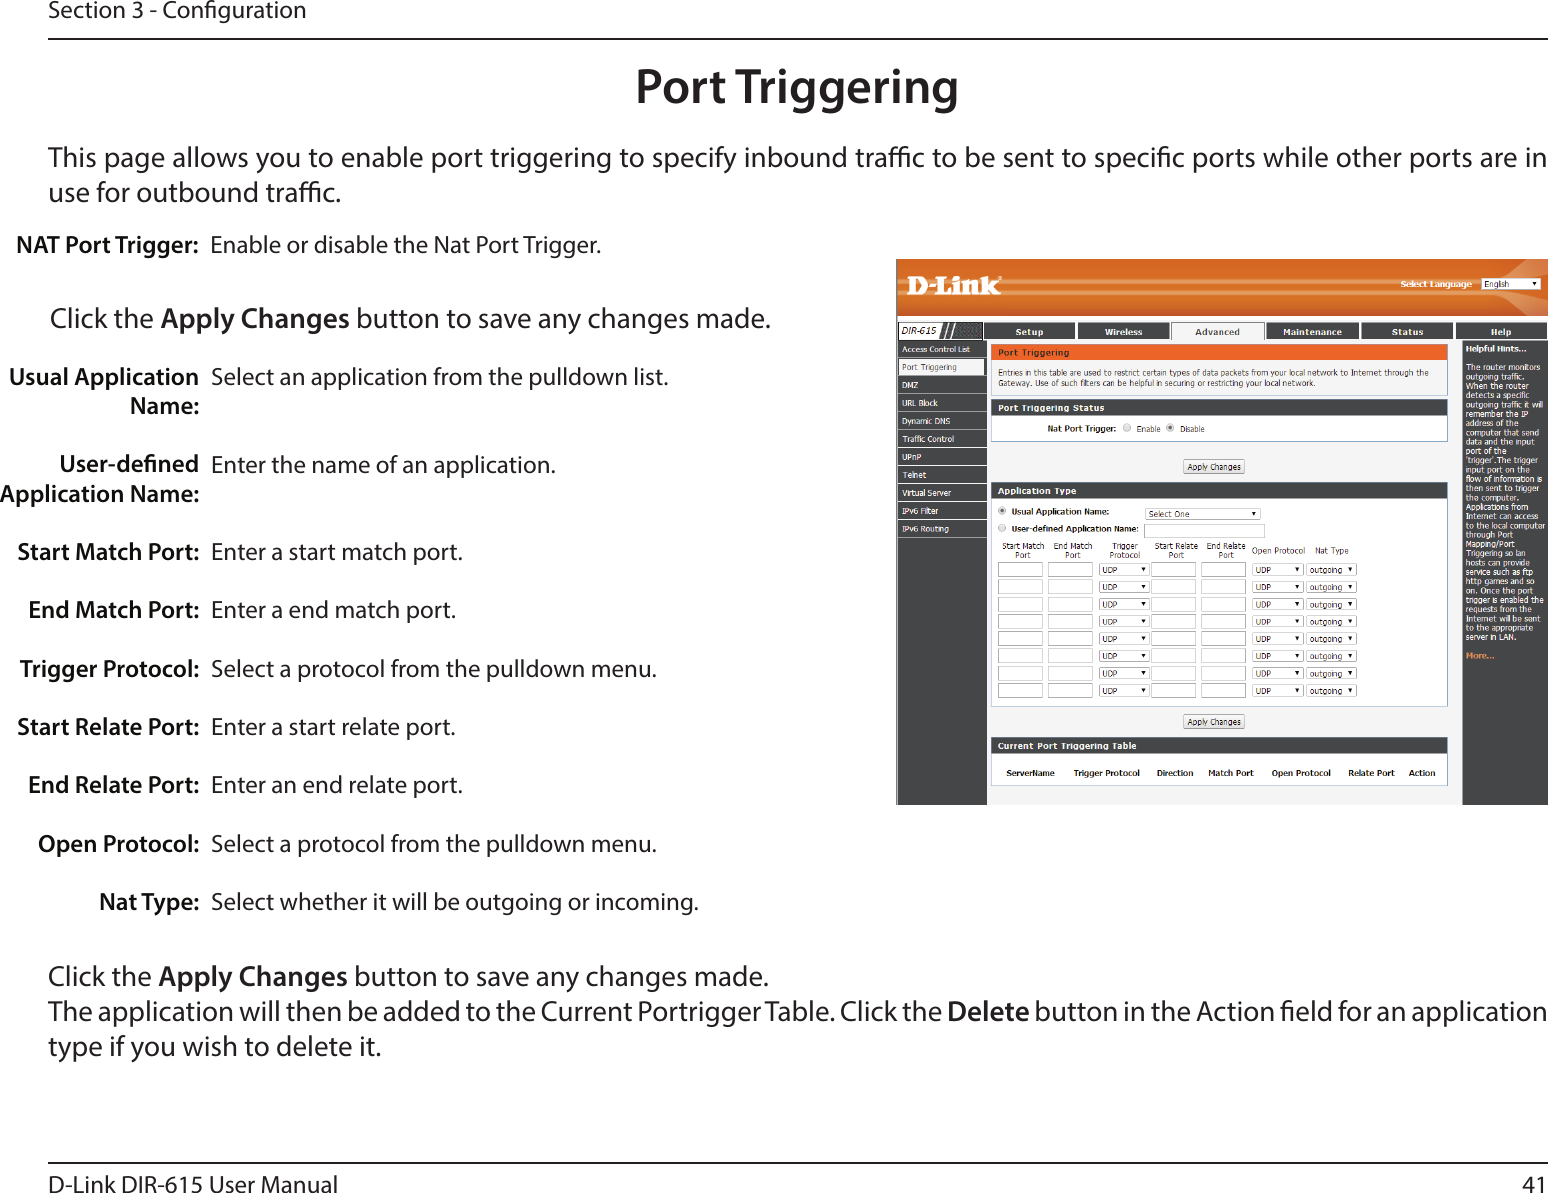 41D-Link DIR-615 User ManualSection 3 - CongurationThis page allows you to enable port triggering to specify inbound trac to be sent to specic ports while other ports are in use for outbound trac.Port TriggeringEnable or disable the Nat Port Trigger.NAT Port Trigger:Click the Apply Changes button to save any changes made.Select an application from the pulldown list.Enter the name of an application.Enter a start match port.Enter a end match port.Select a protocol from the pulldown menu.Enter a start relate port.Enter an end relate port.Select a protocol from the pulldown menu.Select whether it will be outgoing or incoming. Usual Application Name:User-dened Application Name:Start Match Port:End Match Port:Trigger Protocol:Start Relate Port:End Relate Port:Open Protocol:Nat Type:Click the Apply Changes button to save any changes made. The application will then be added to the Current Portrigger Table. Click the Delete button in the Action eld for an application type if you wish to delete it.